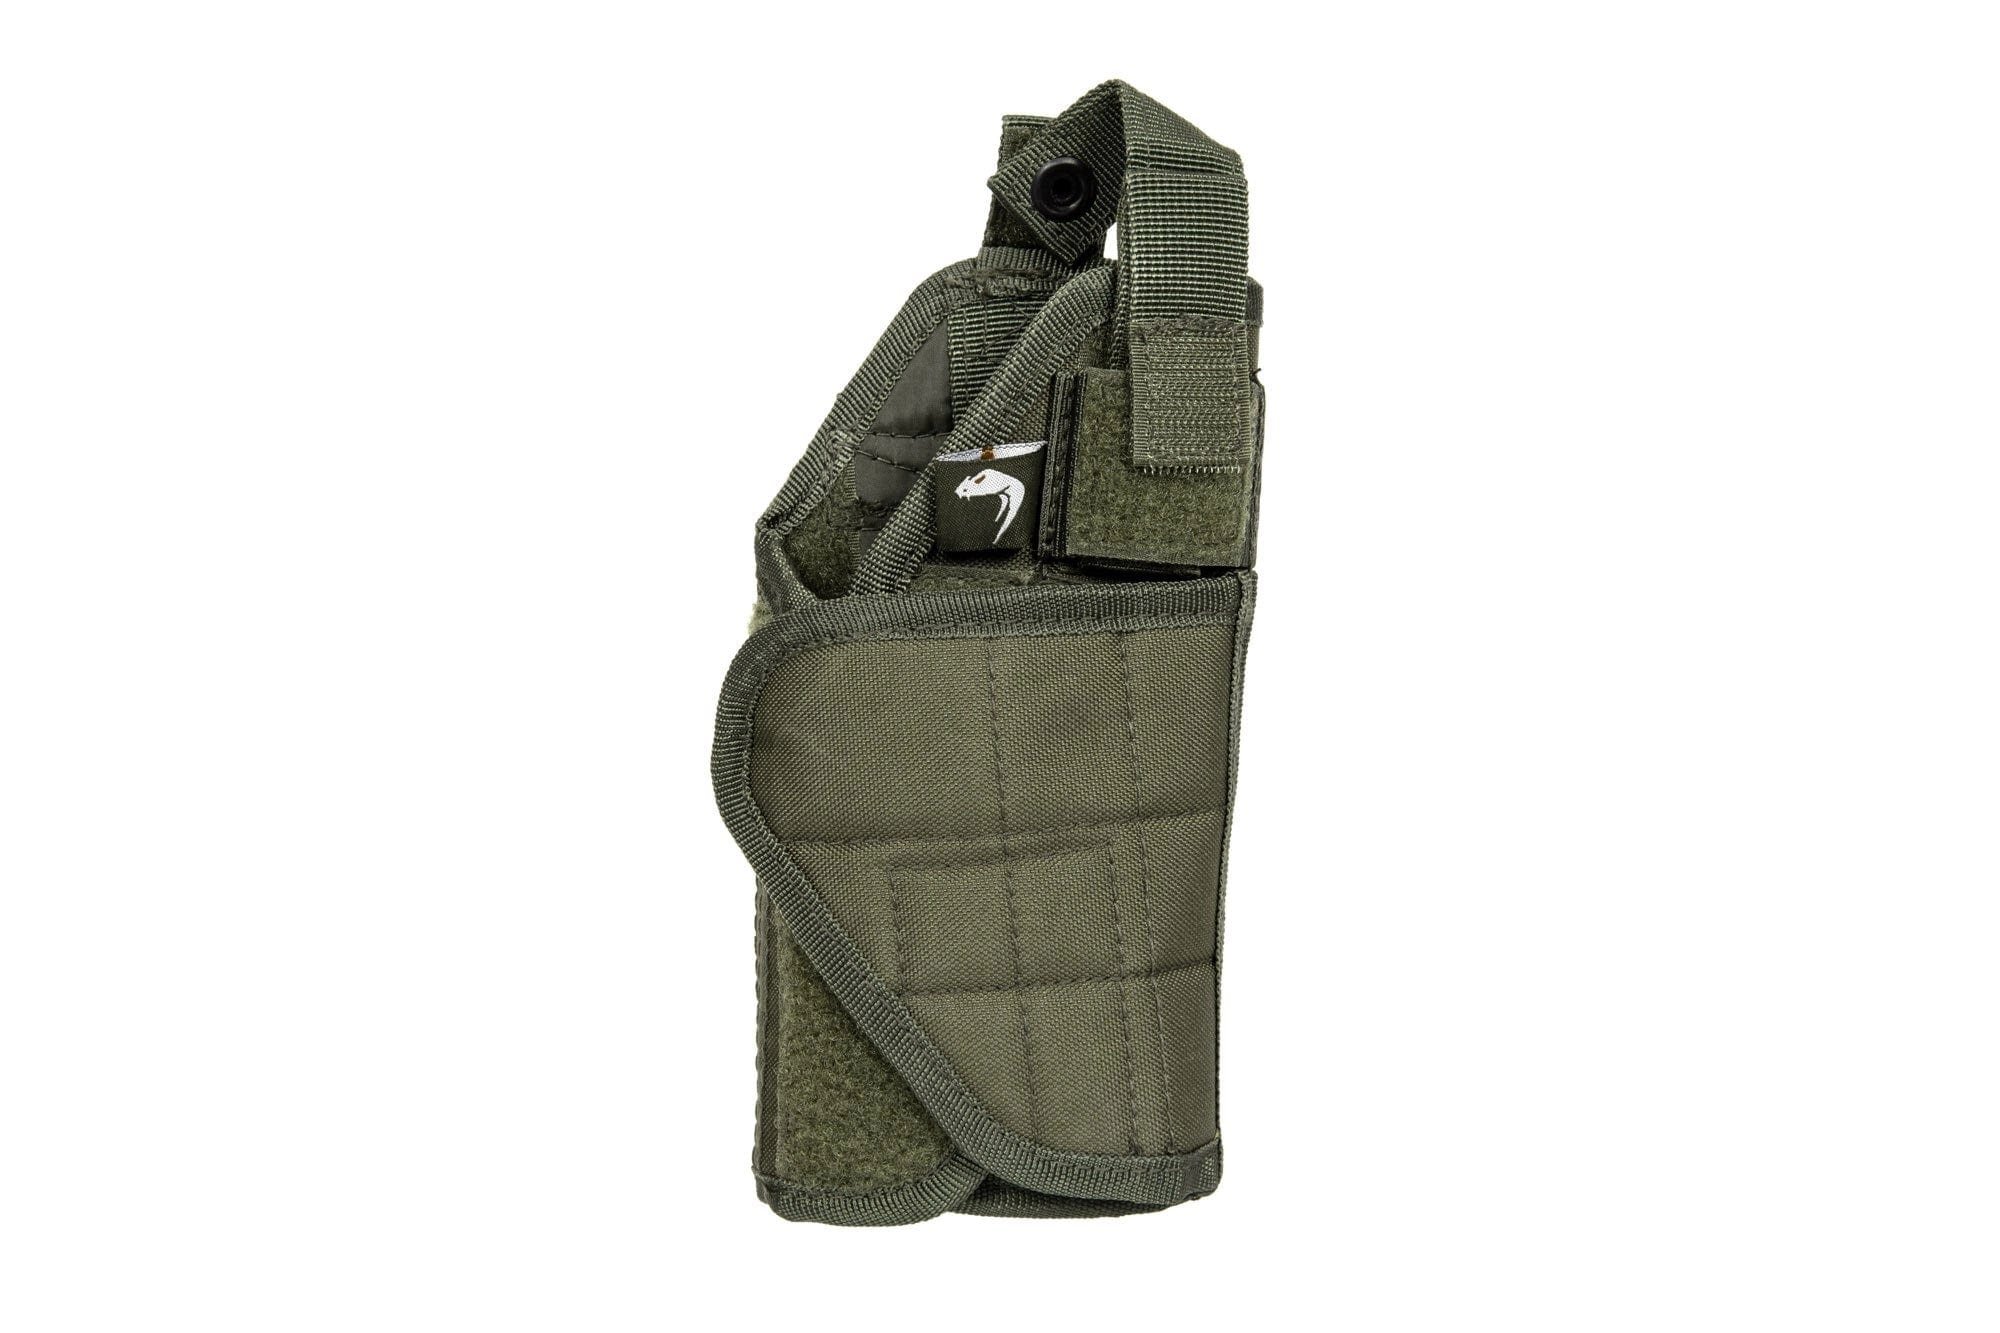 Holster universel réglable MOLLE - olive